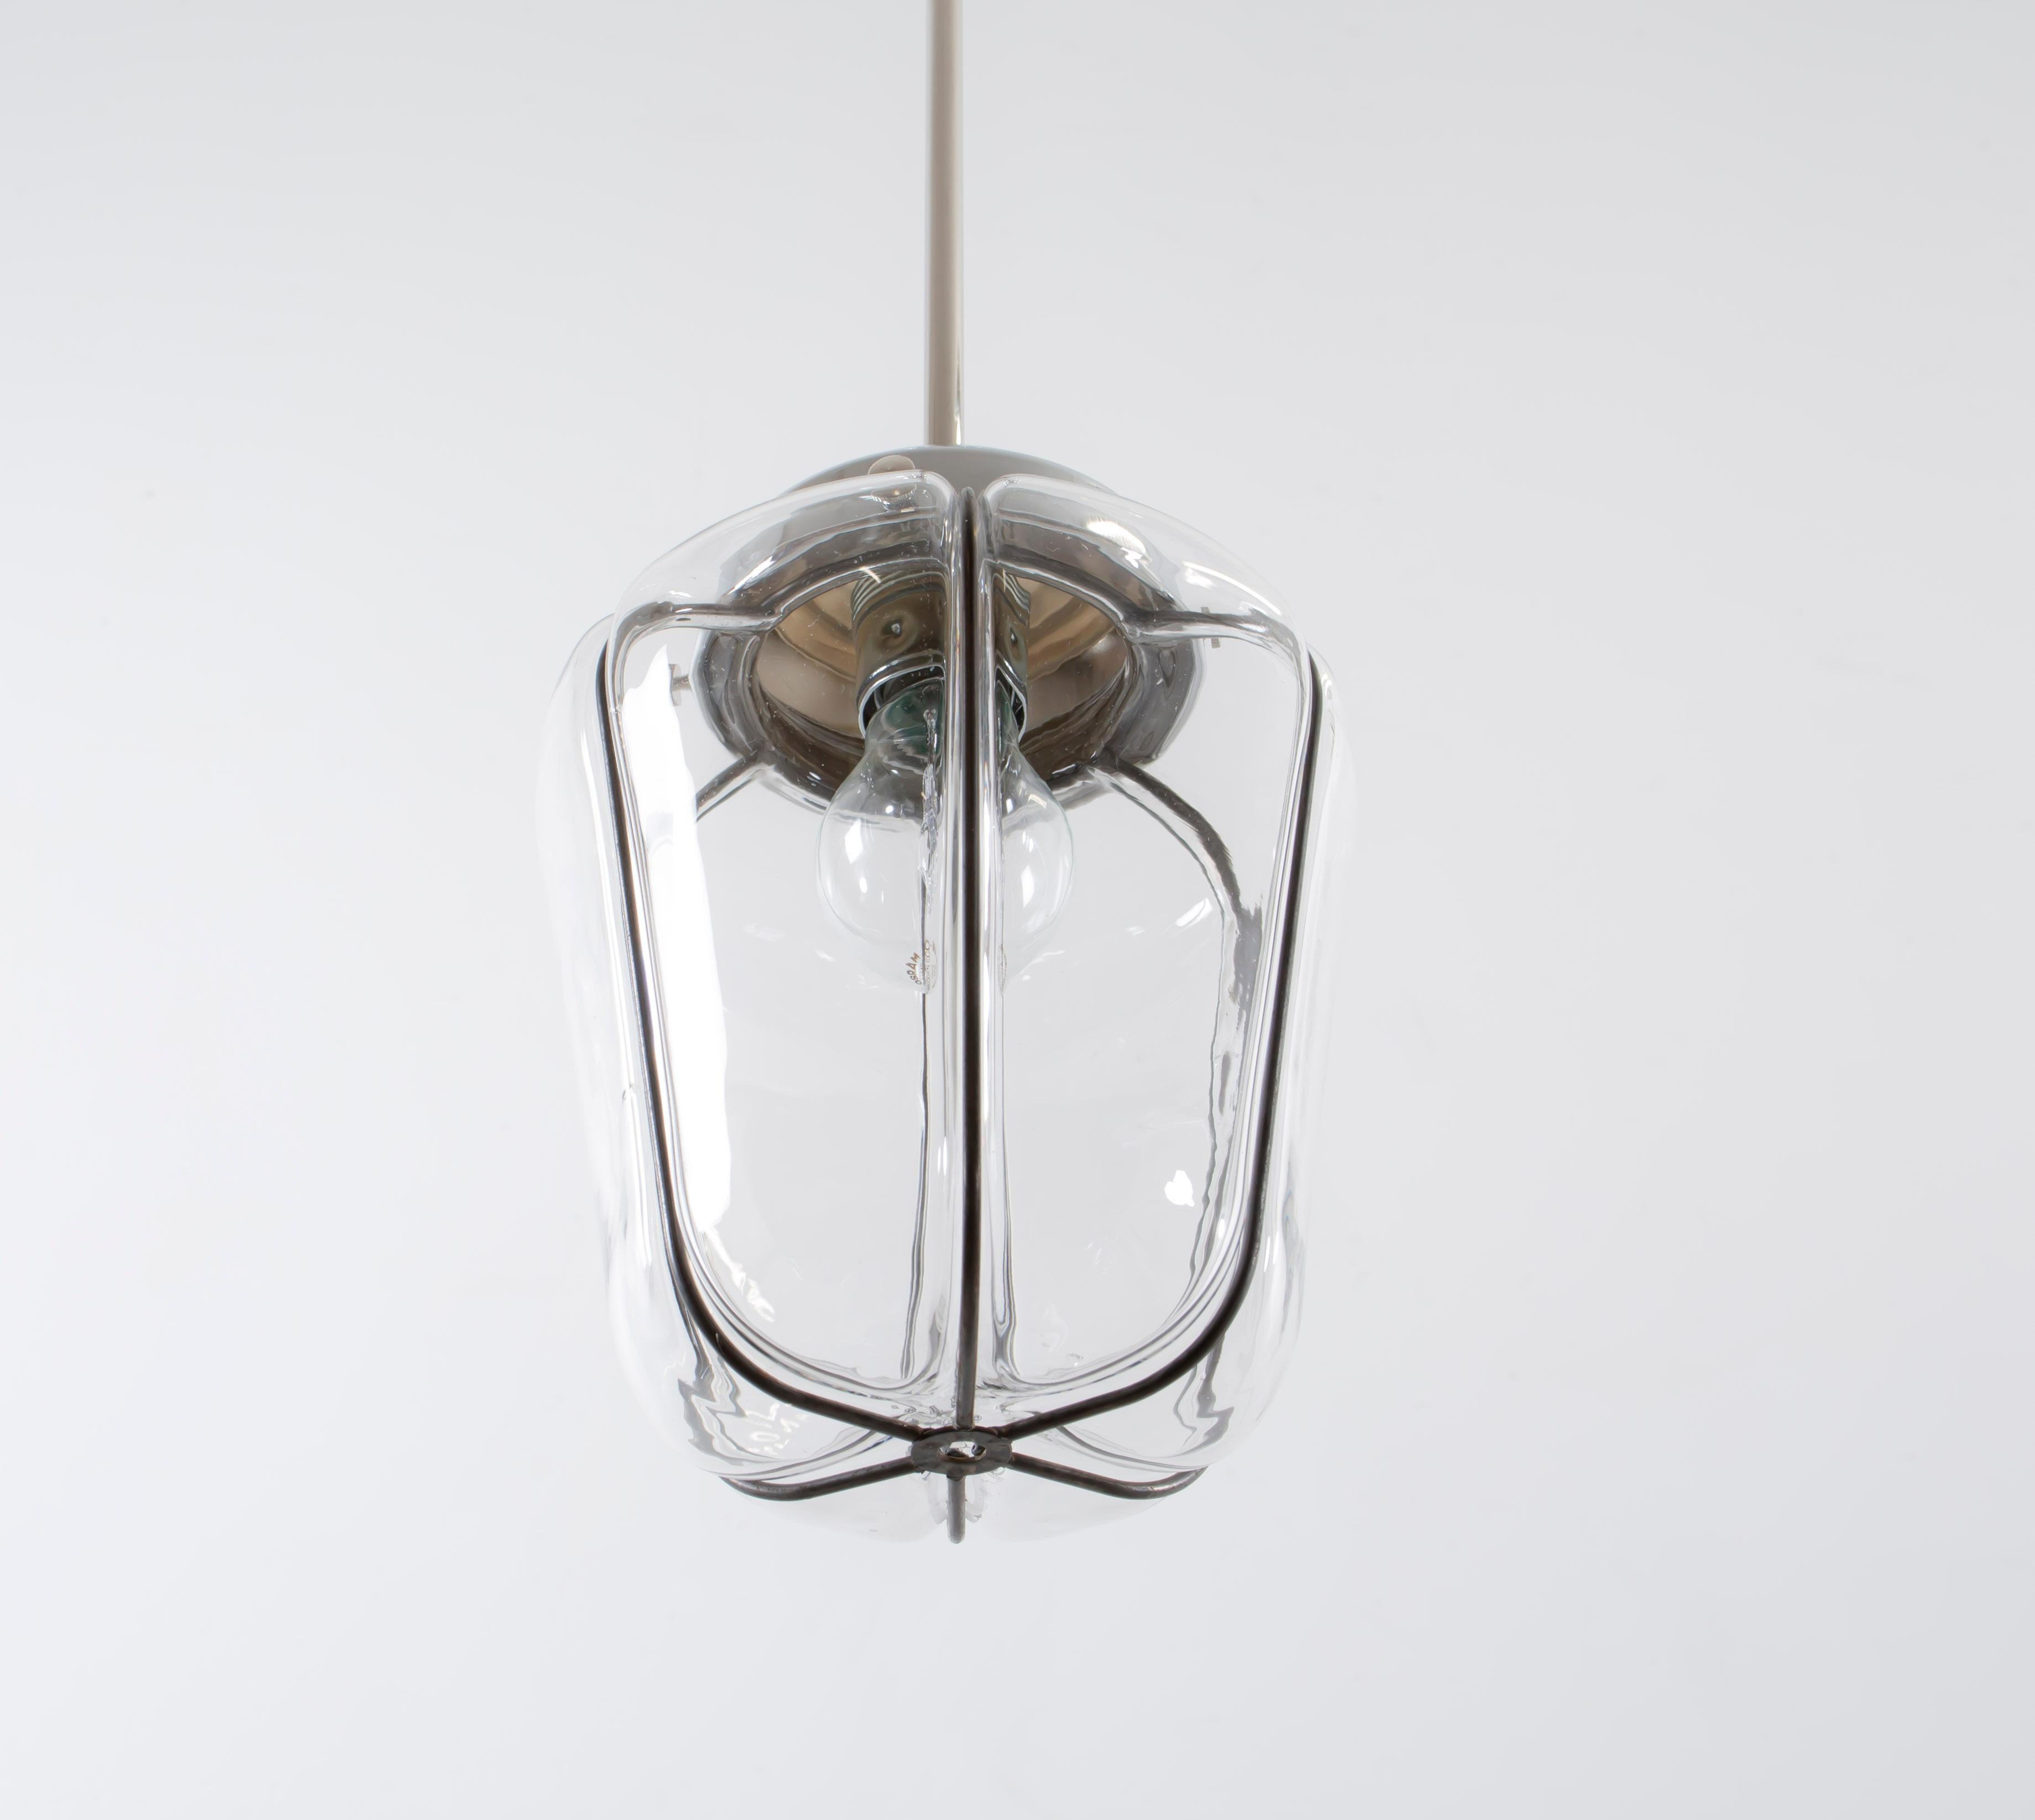 Mid-20th Century Functionalist Ceiling Light, Norway, 1950s For Sale